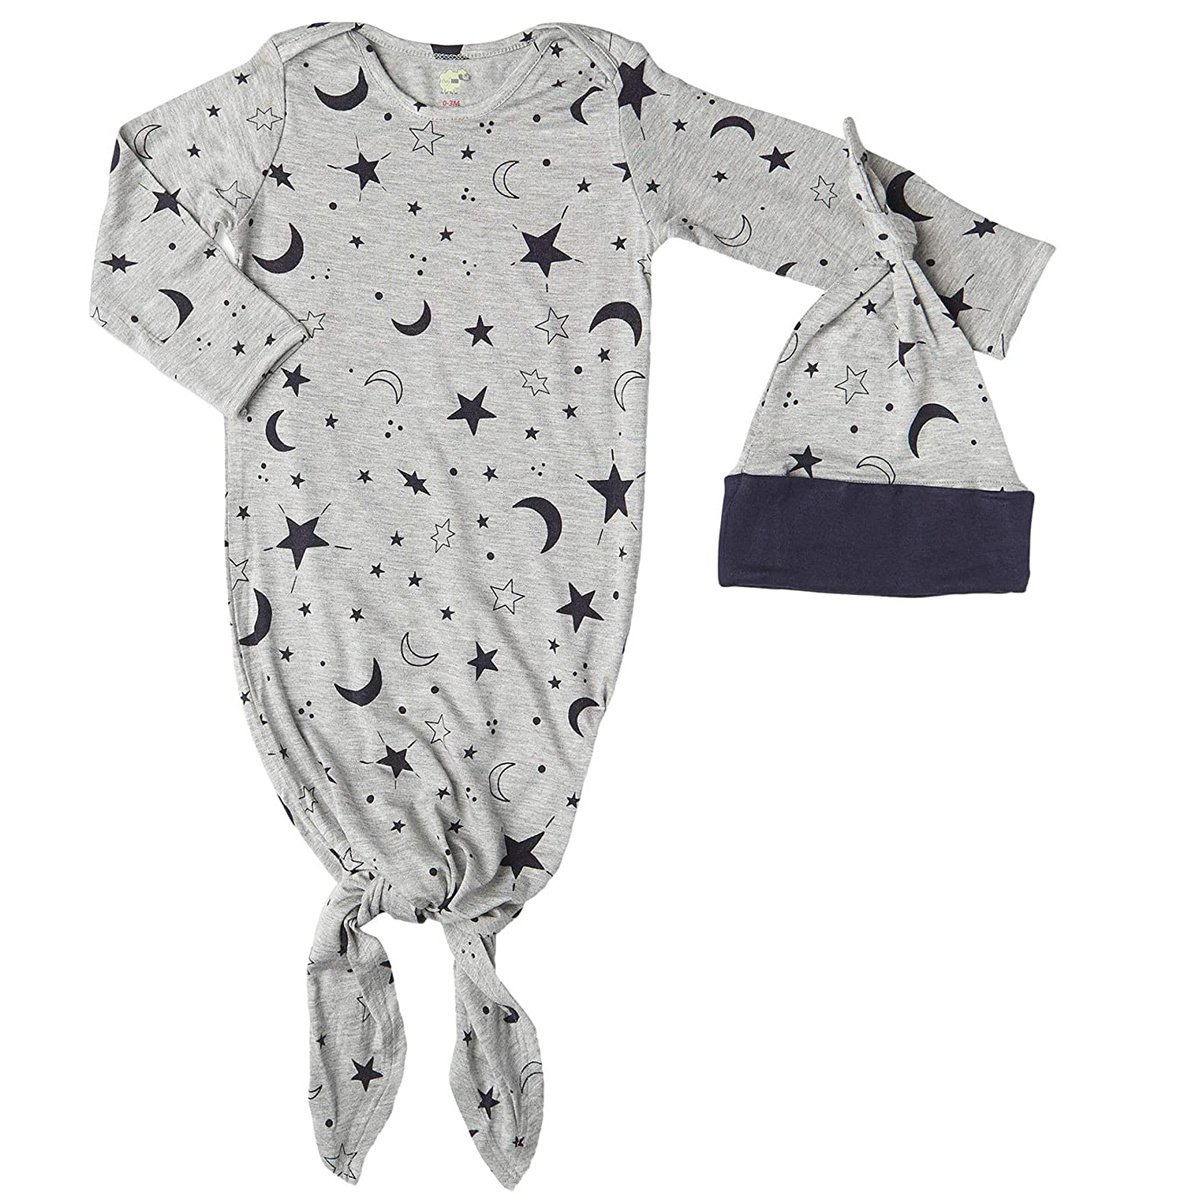 Everly Grey Everly Grey Knotted Gown and Cap Set - Twinkle Night (0-3mo)